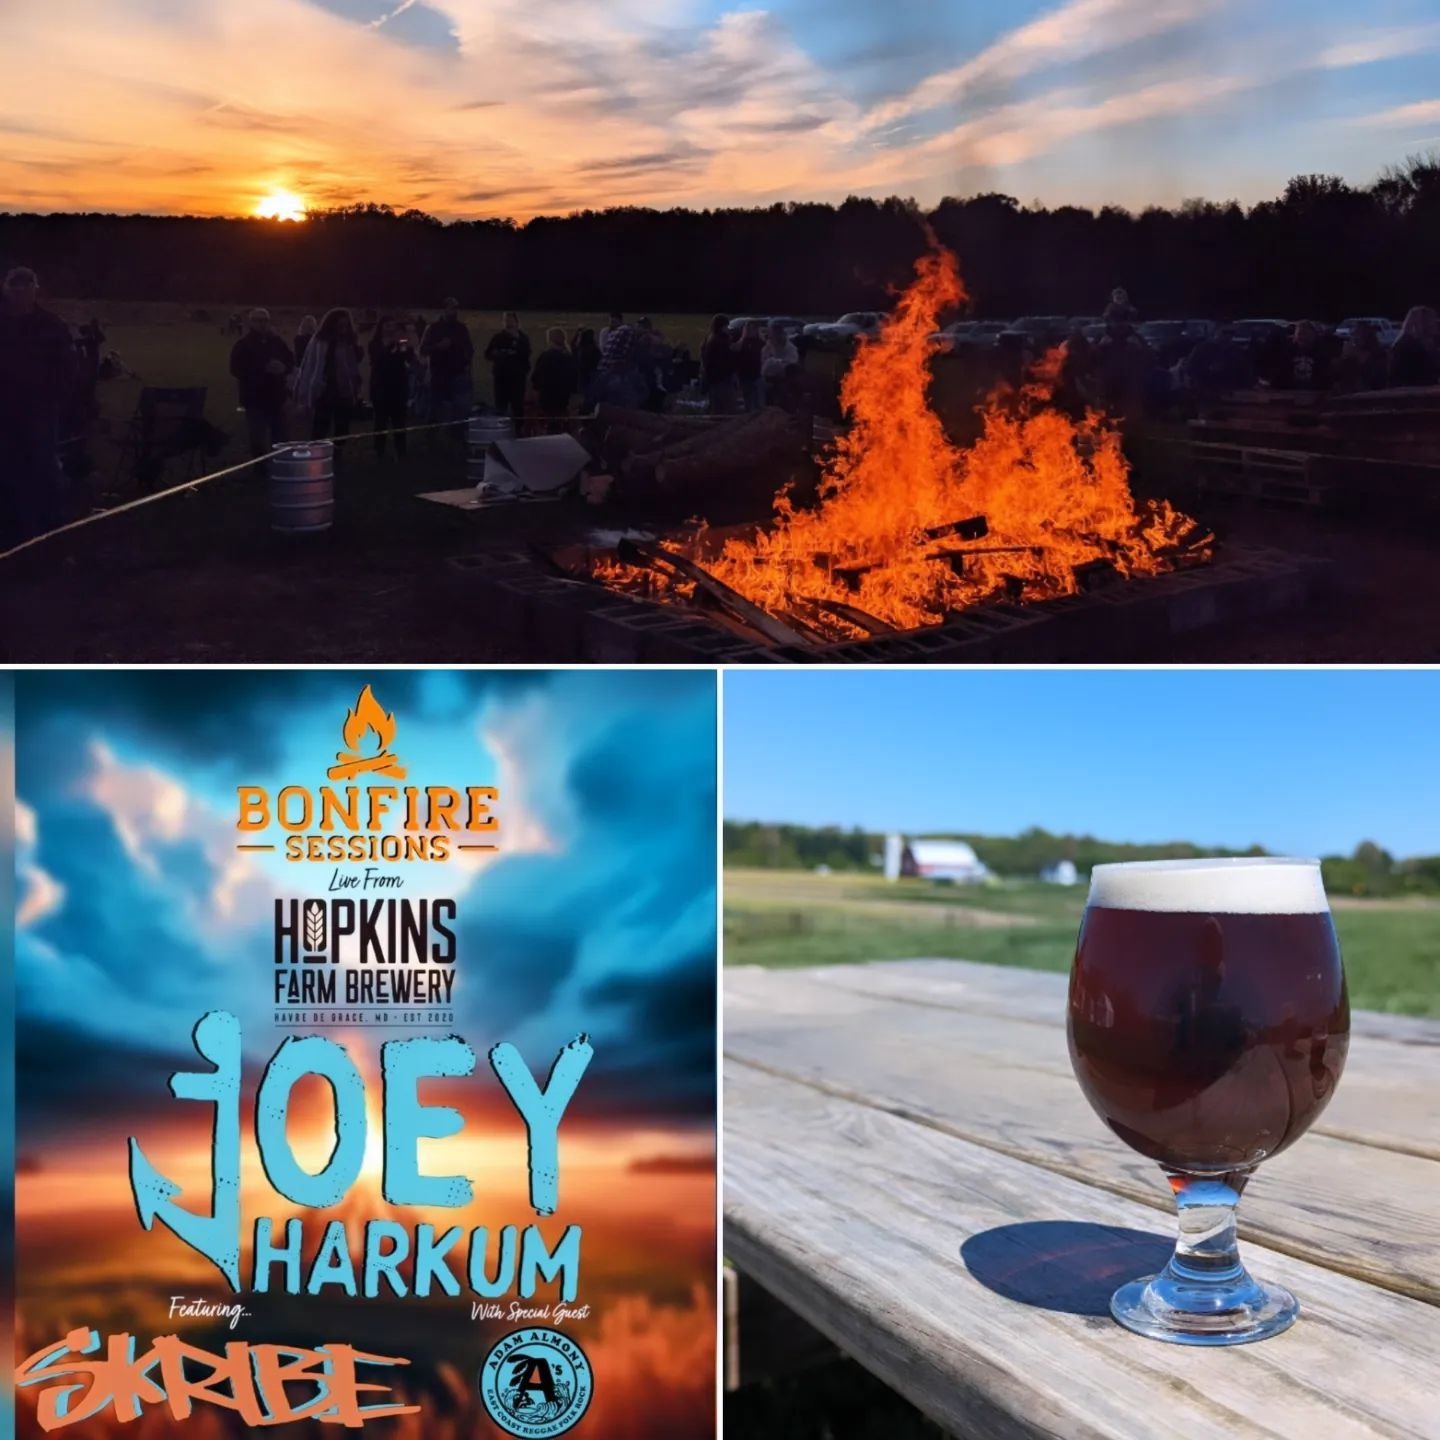 It's going to be a fun Saturday here at Hopkins Farm Brewery and we are open to the public all day!

Food: @CowboyEats and @Love Crust.Pizza at 12PM
Music: Tom Beers and Jerry Reicke at 2PM
Bonfire Sessions with Joey Harkum Featuring Skribe and Speci